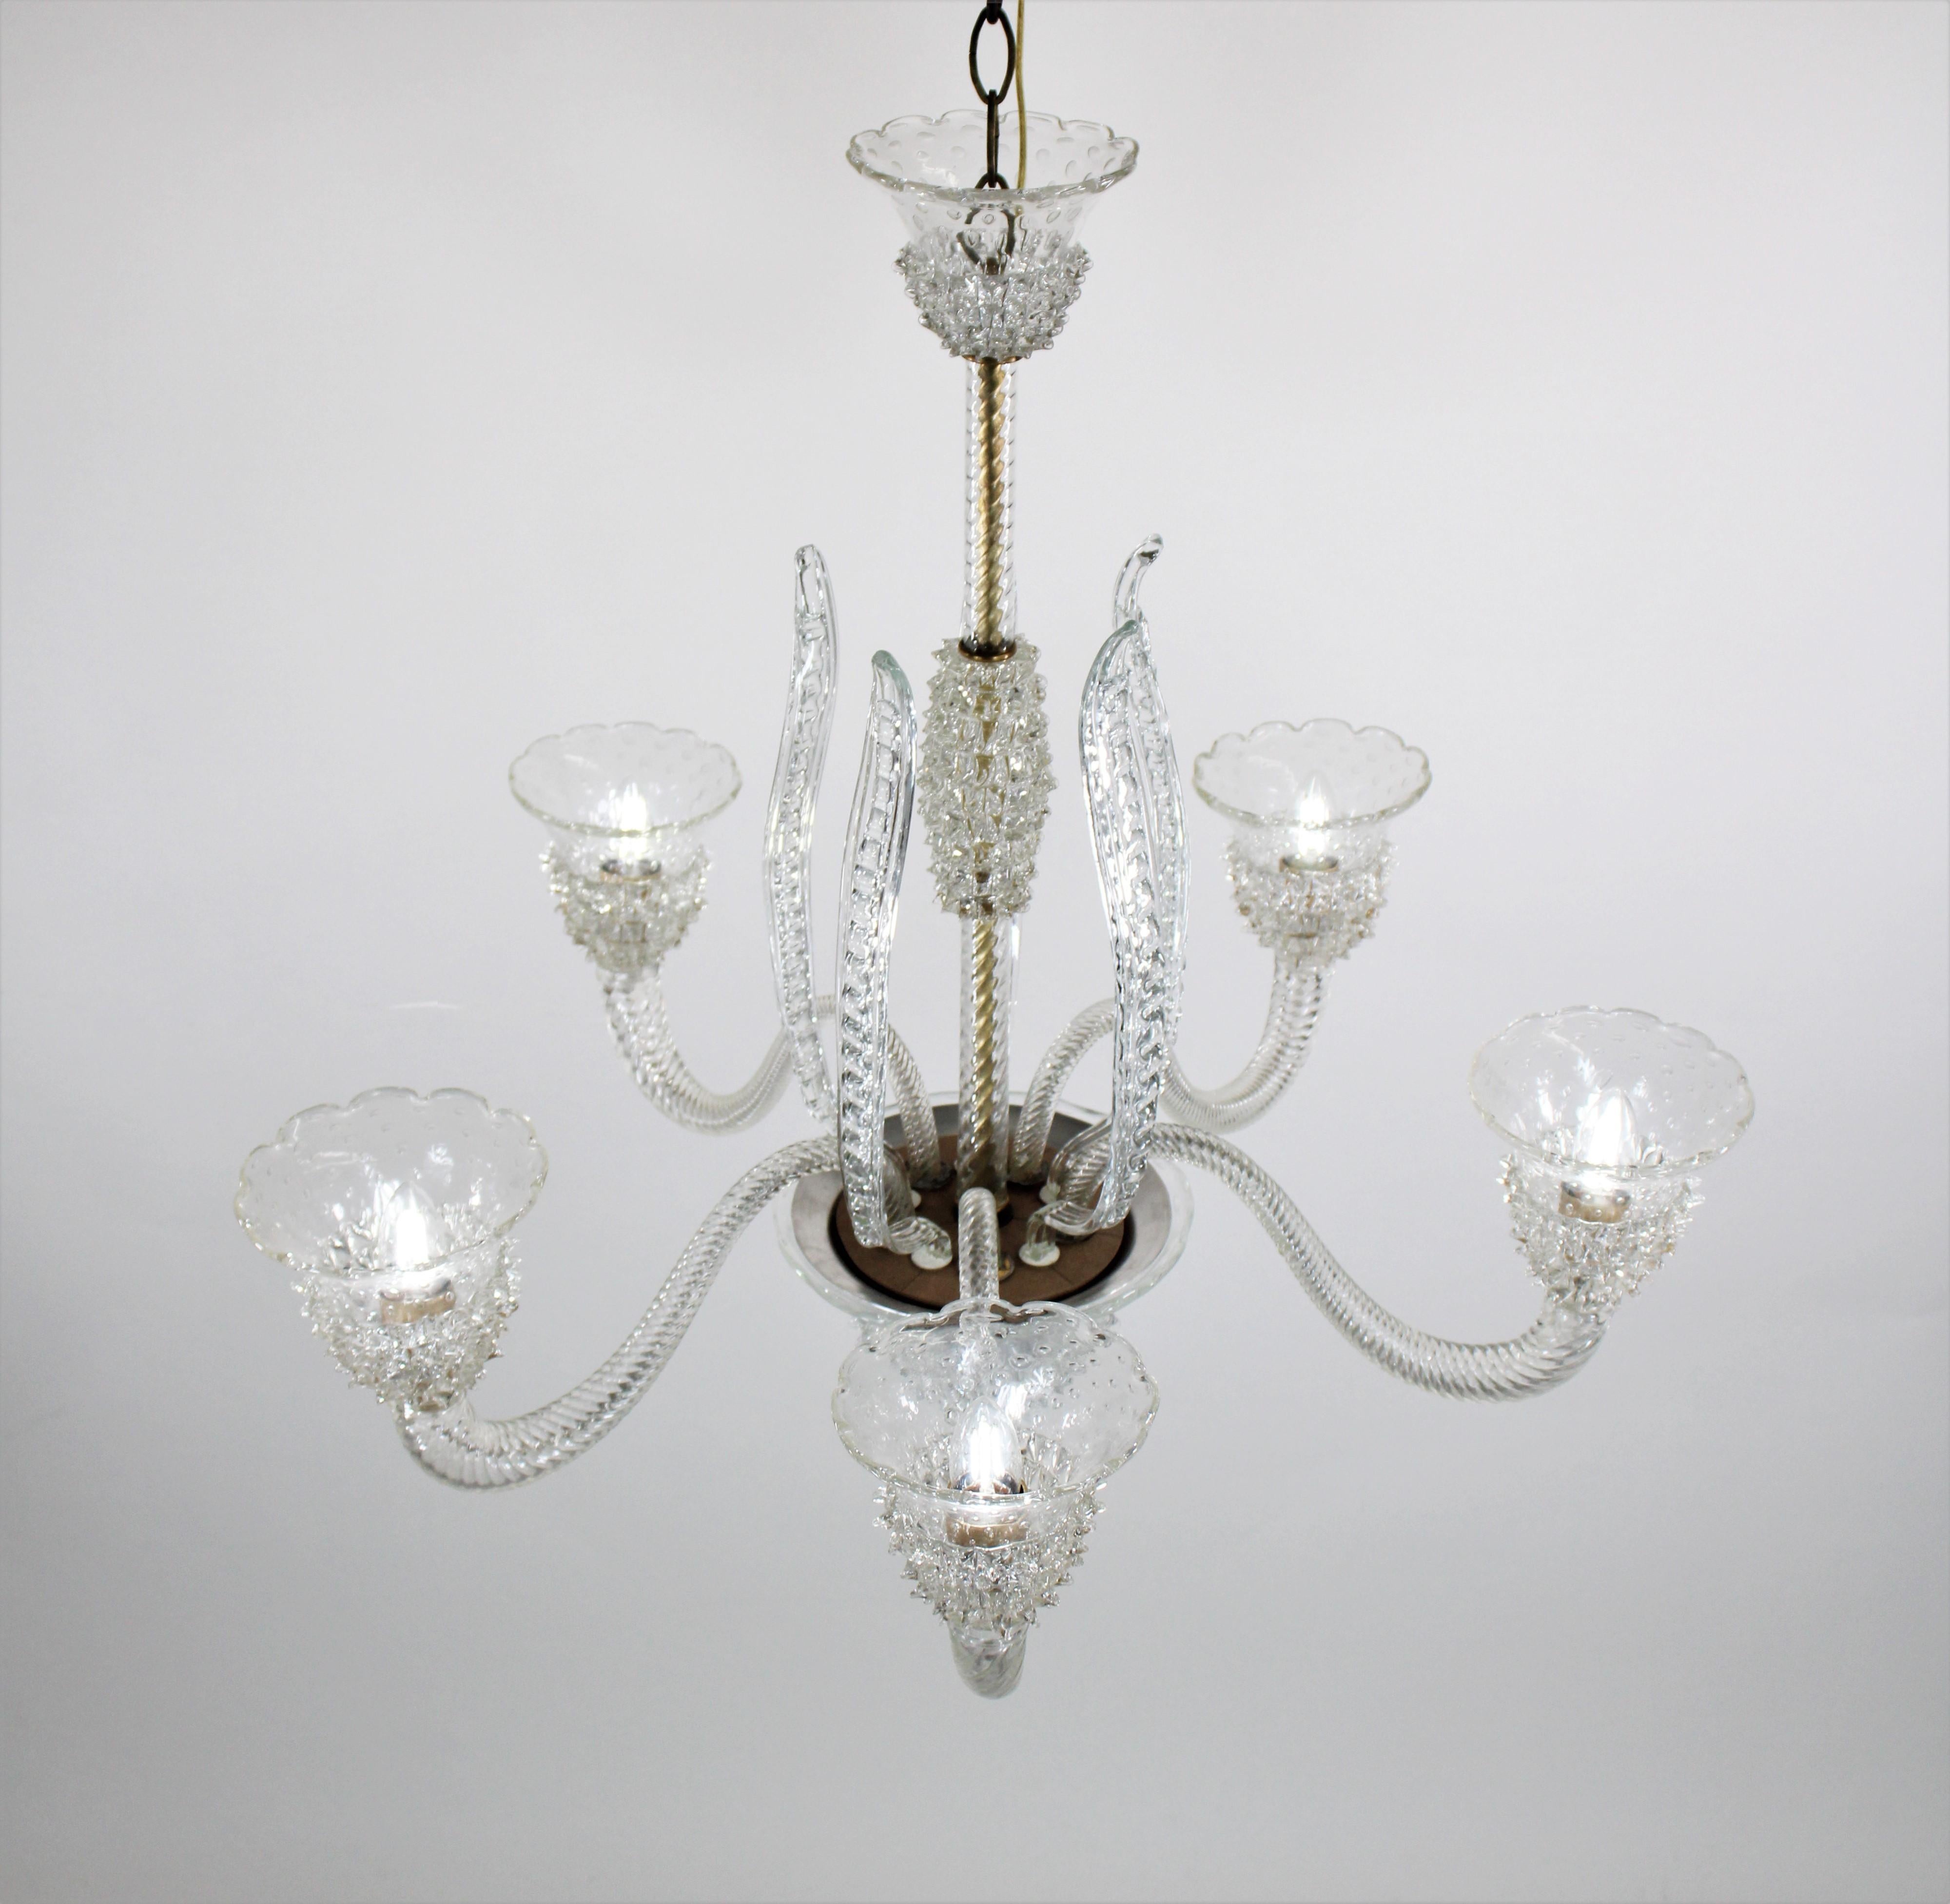 Mid-Century Modern Five Arm Rostrato Murano Chandelier in the Manner of Ercole Barovier For Sale